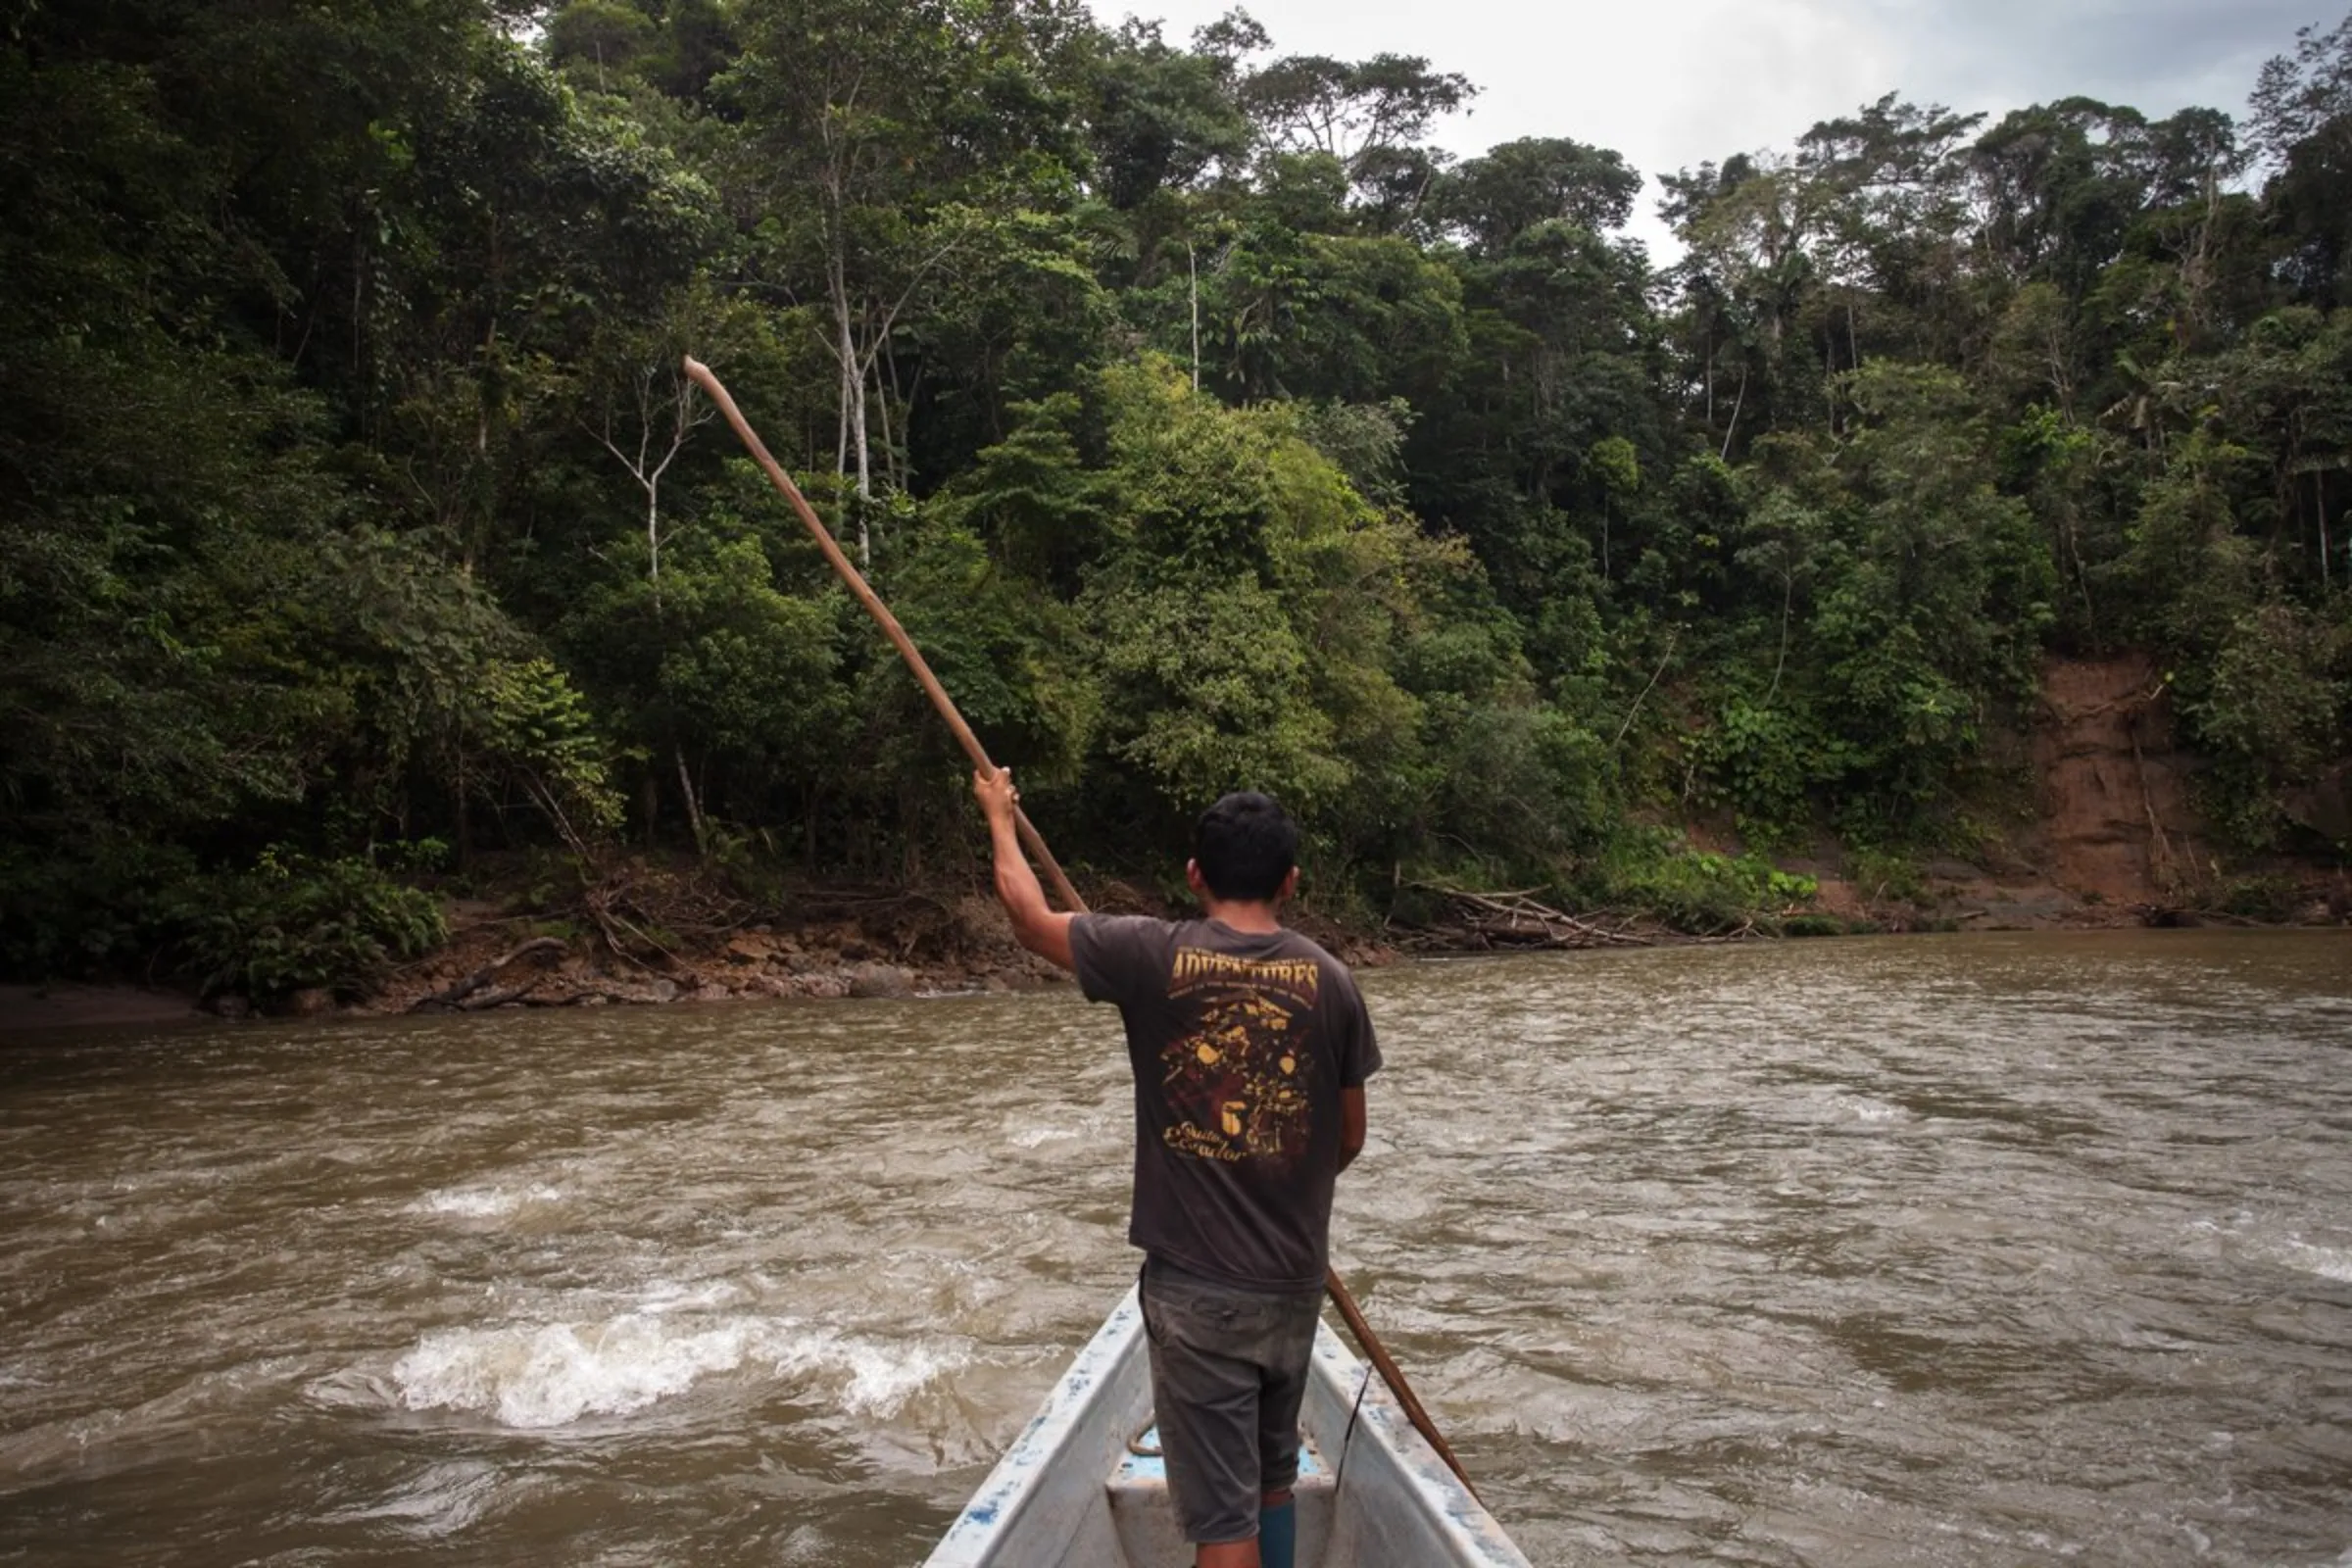 A man from the Waorani of Pastaza indigenous group navigates the choppy Curaray River in the Amazon province of Pastaza, Ecuador, on April 25, 2022